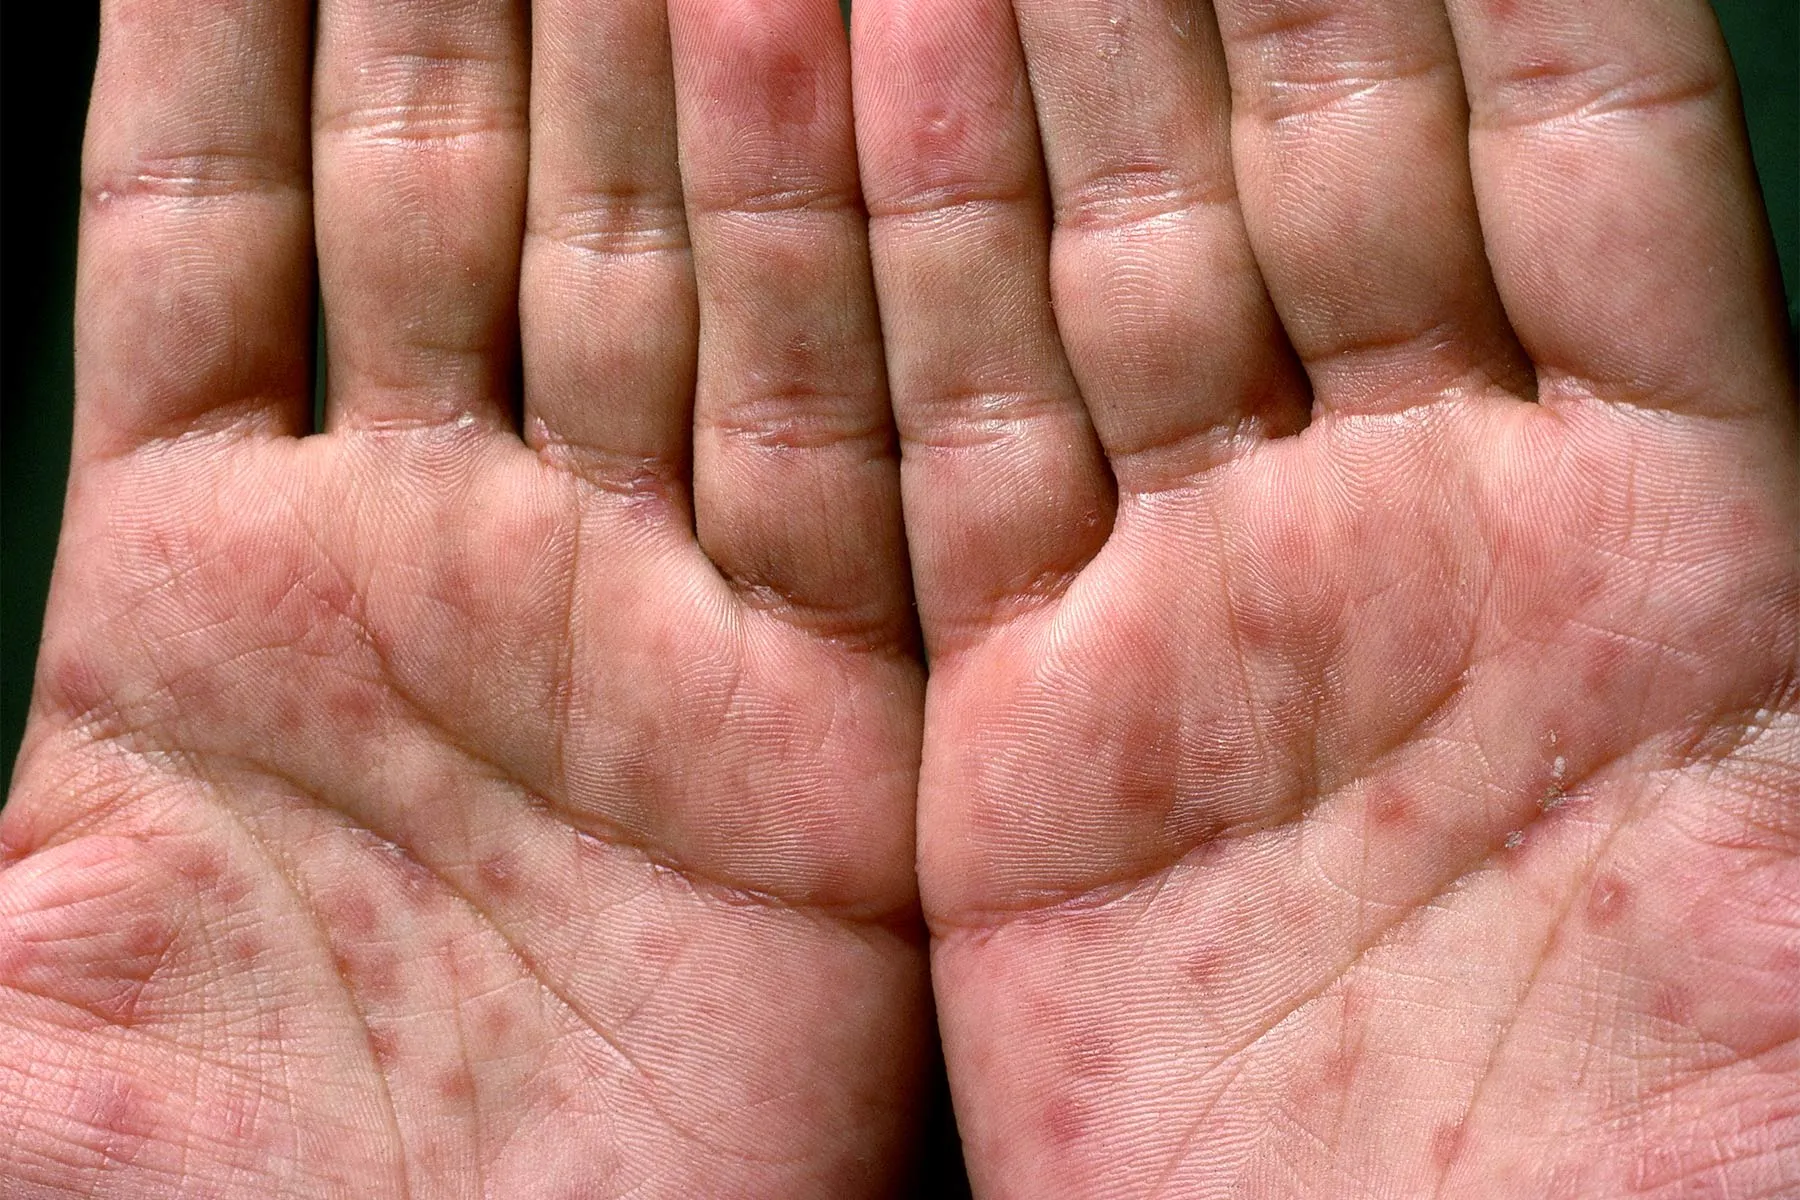 warts on hands hiv